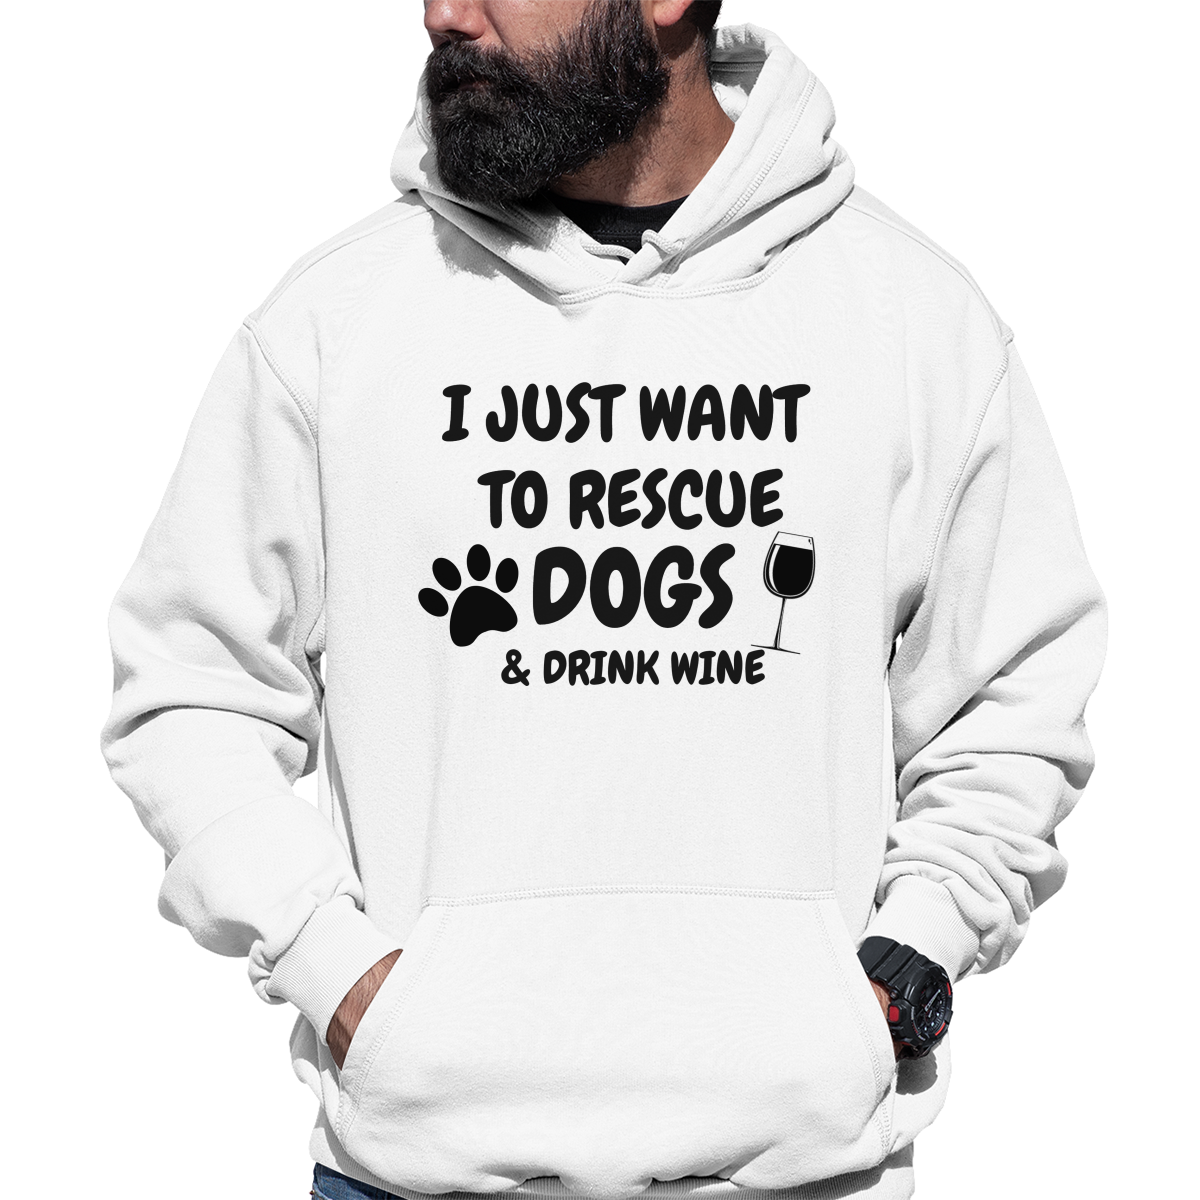 Dogs and Drink Wine Unisex Hoodie | White